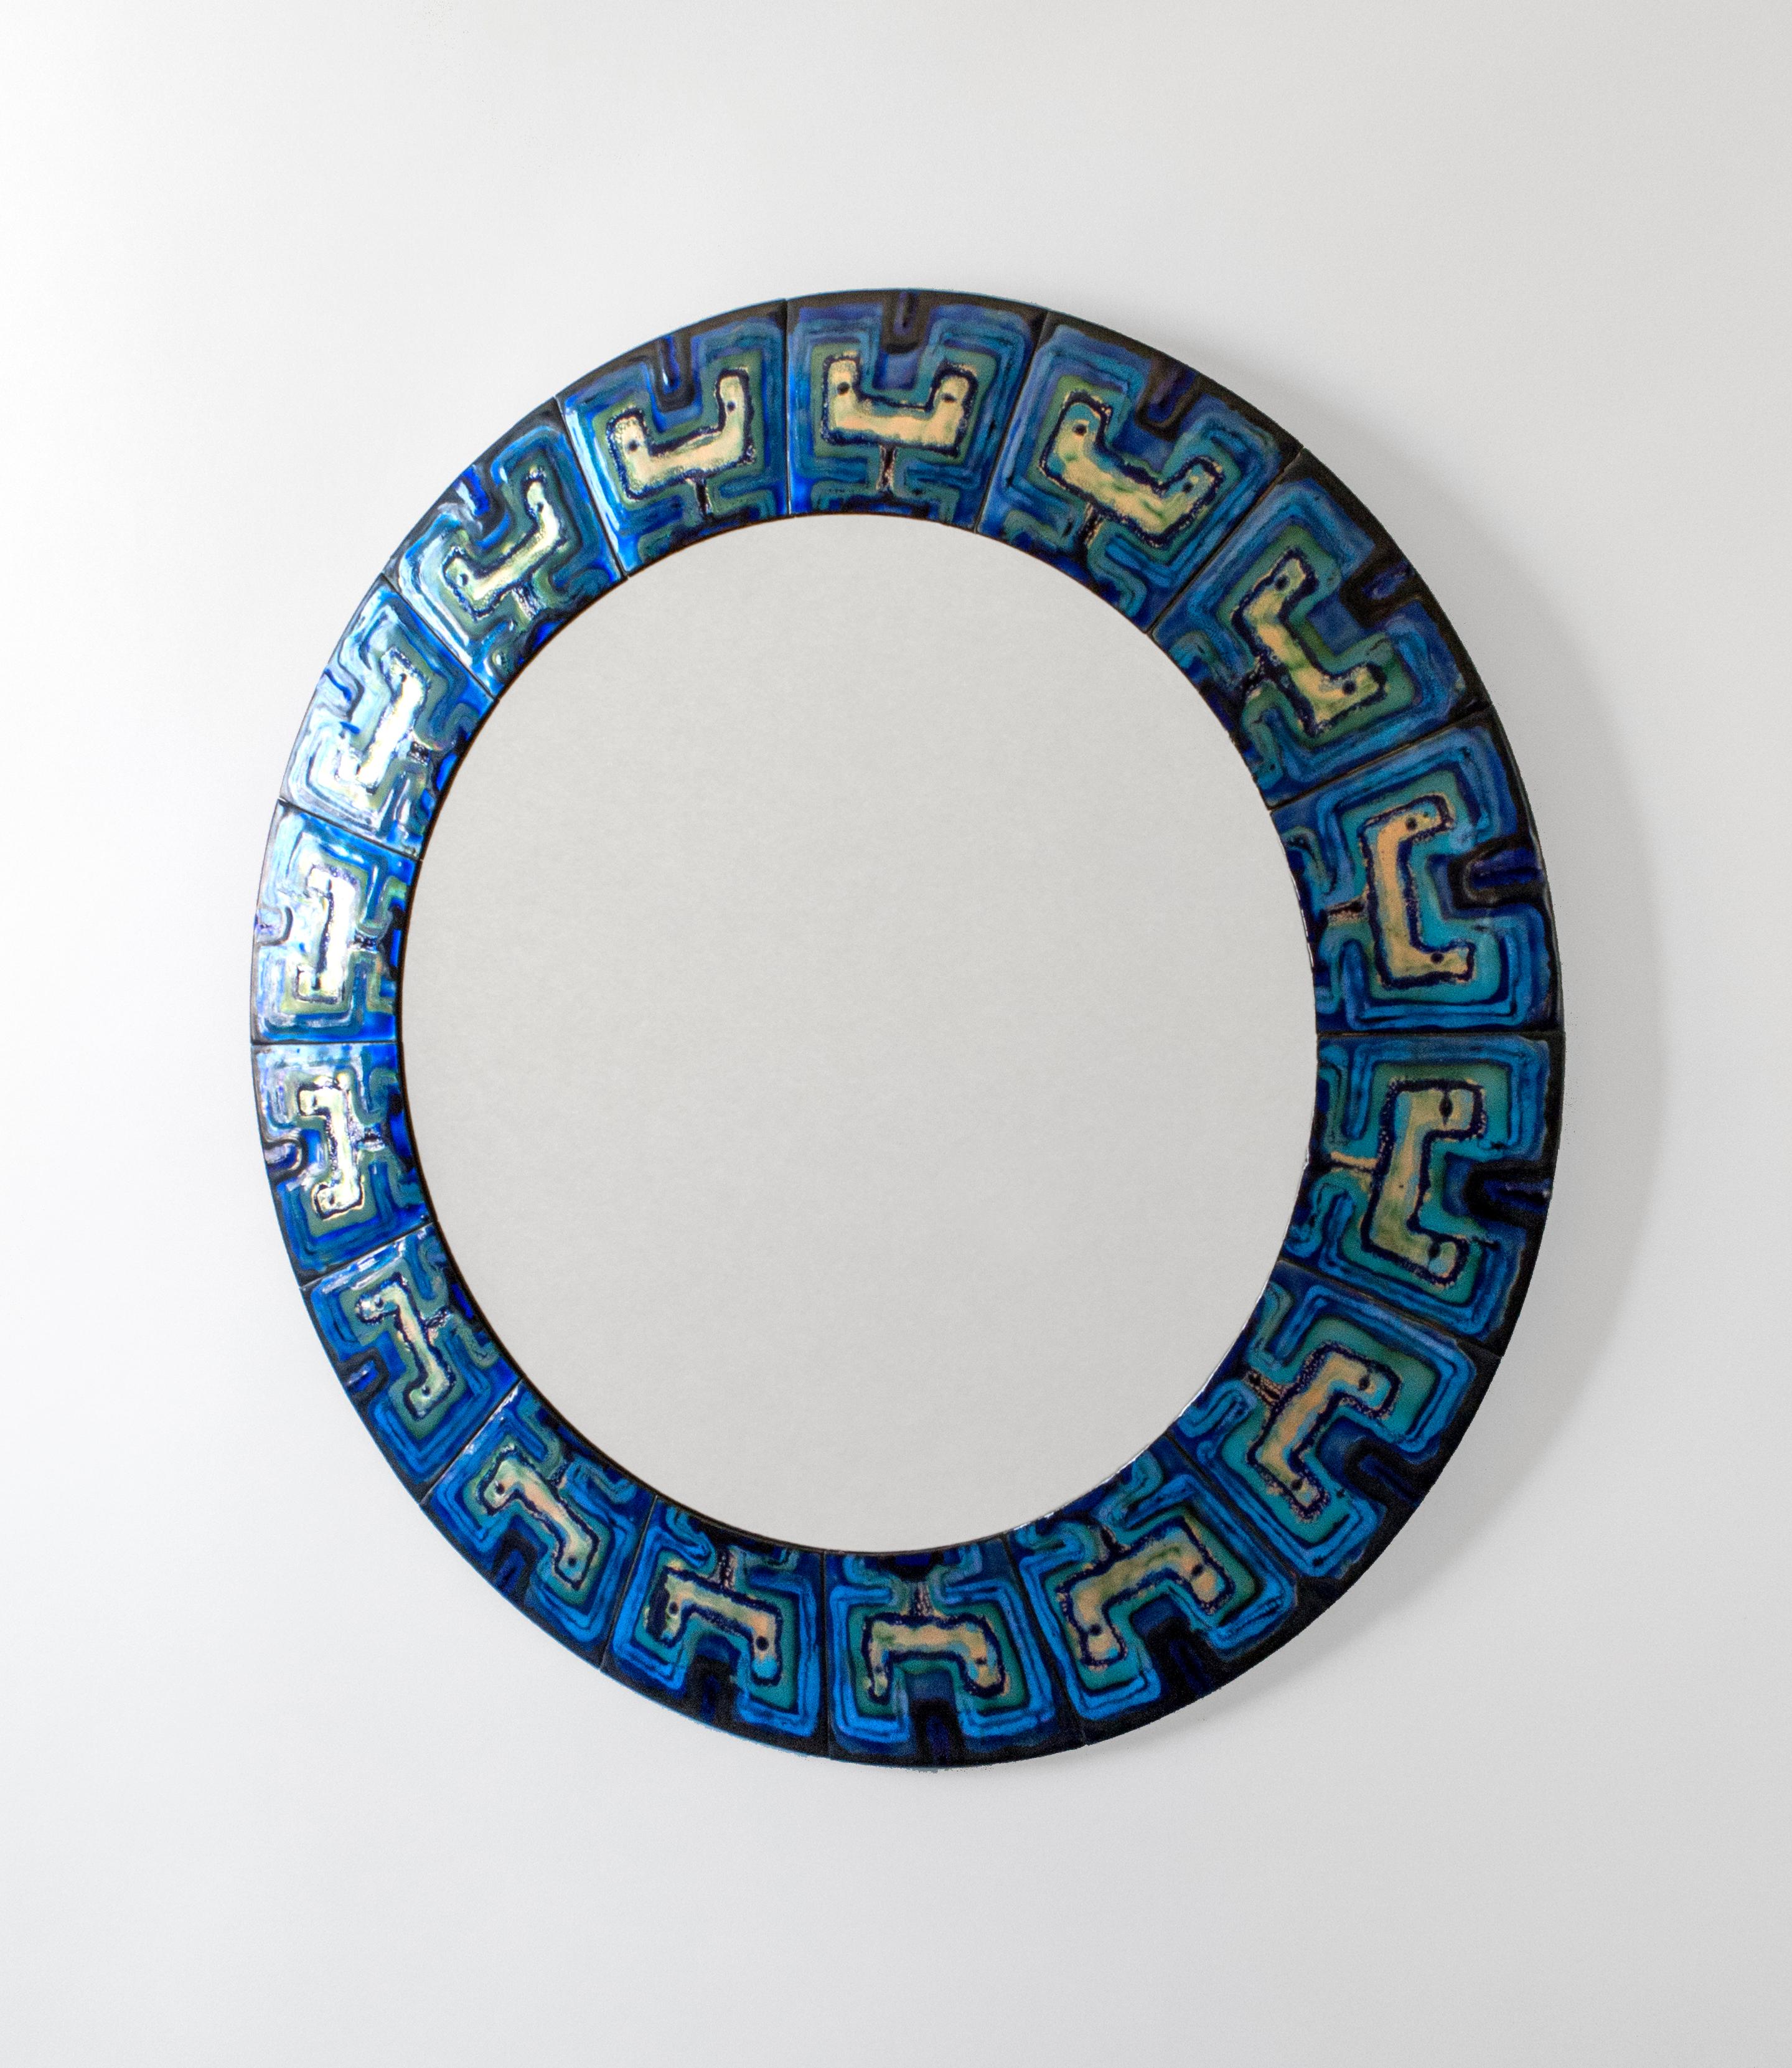 Composed of enameled copper plates hand-painted by the Danish artist Bodil Eje. The repeating pattern displays richly variegated blues enclosing colorless enamel reserves, surrounding a colorless glass mirror plate.

A vivid, sublime, and unique